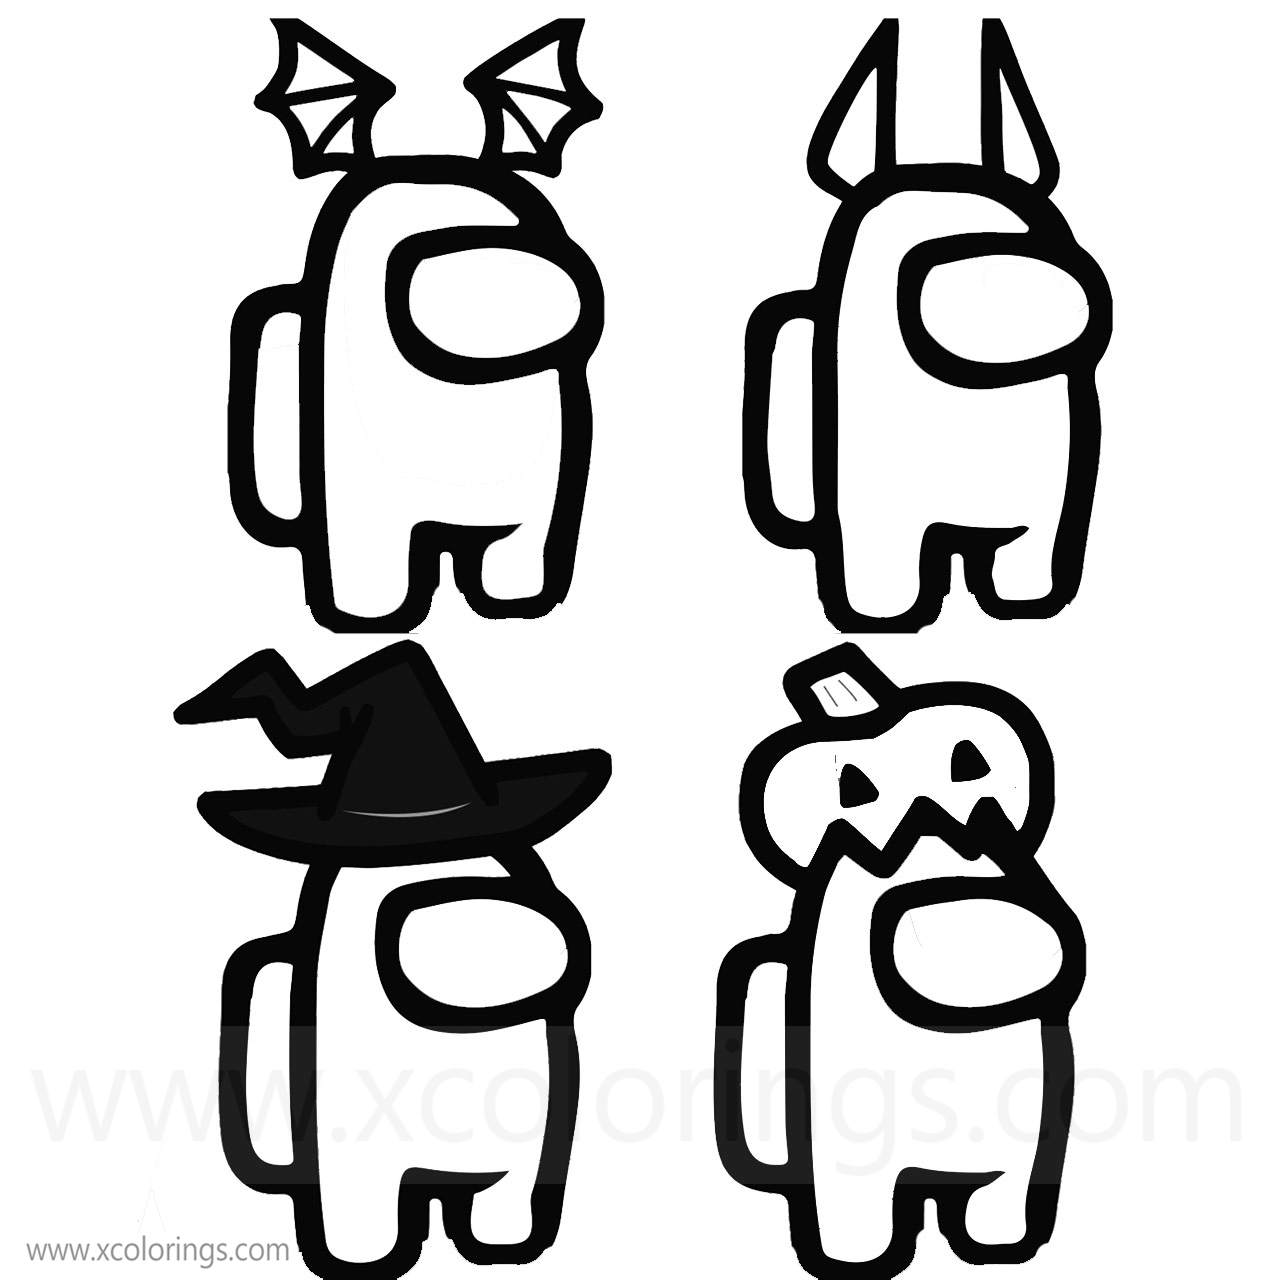 Free Among Us Coloring Pages Halloween Costumes SKins Hats printable